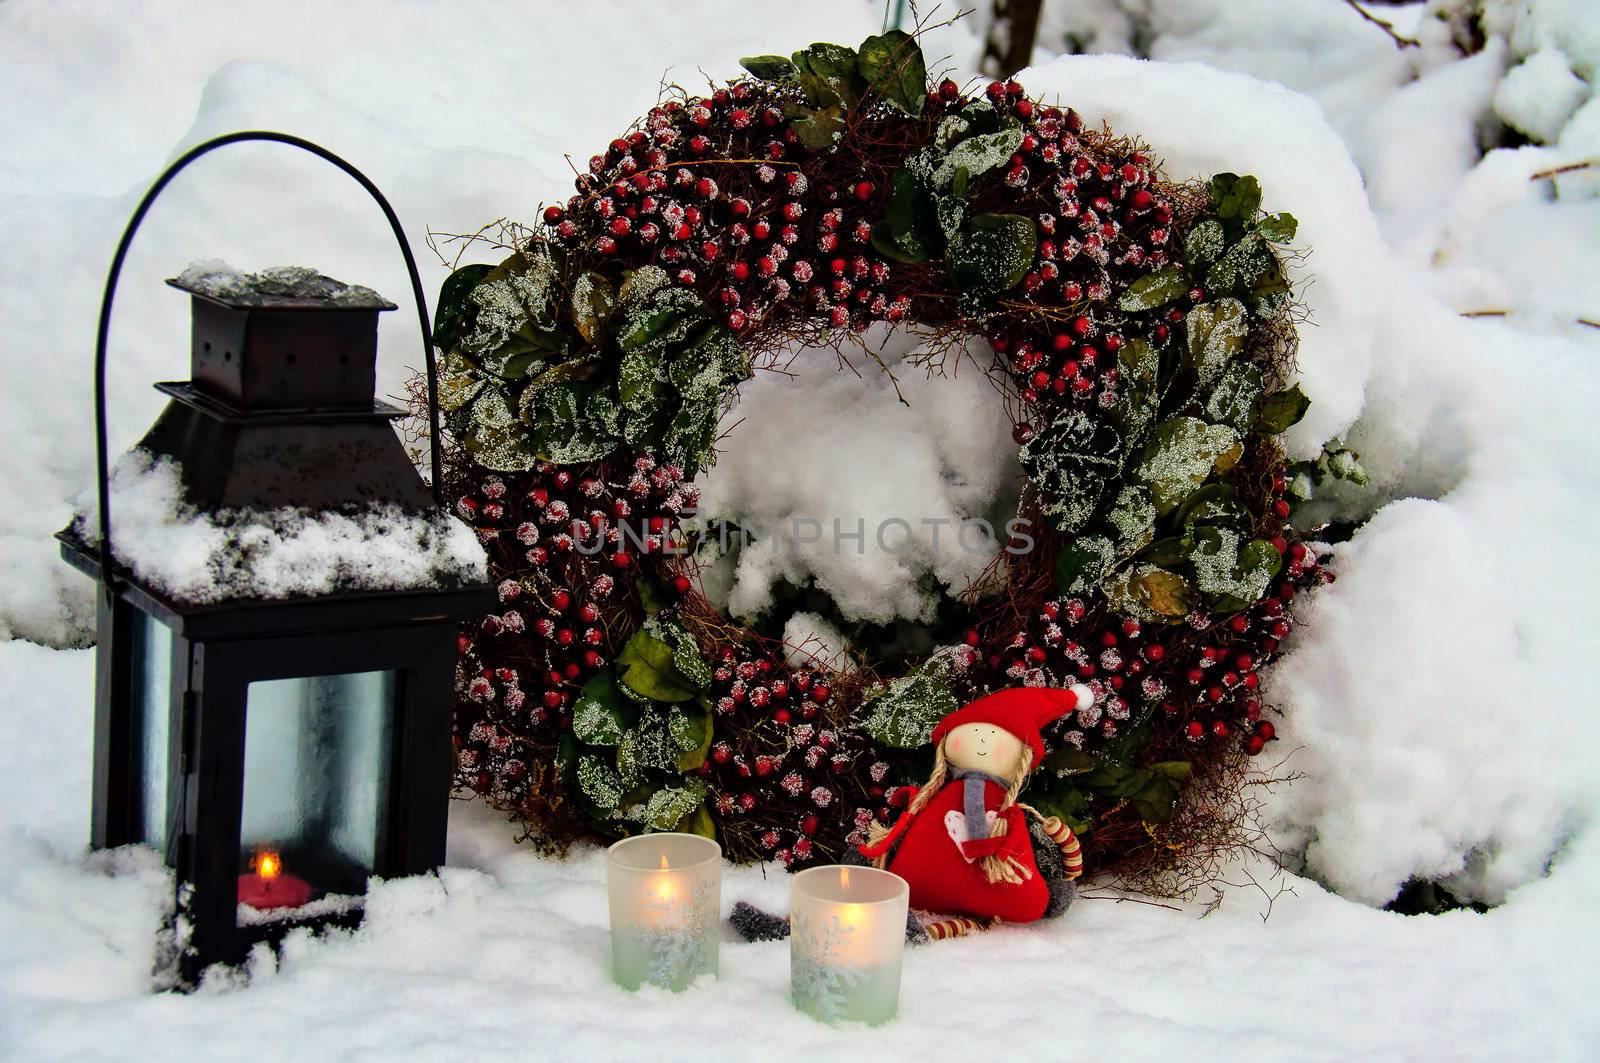 Christmas decoration for the garden with candlelight and wreath